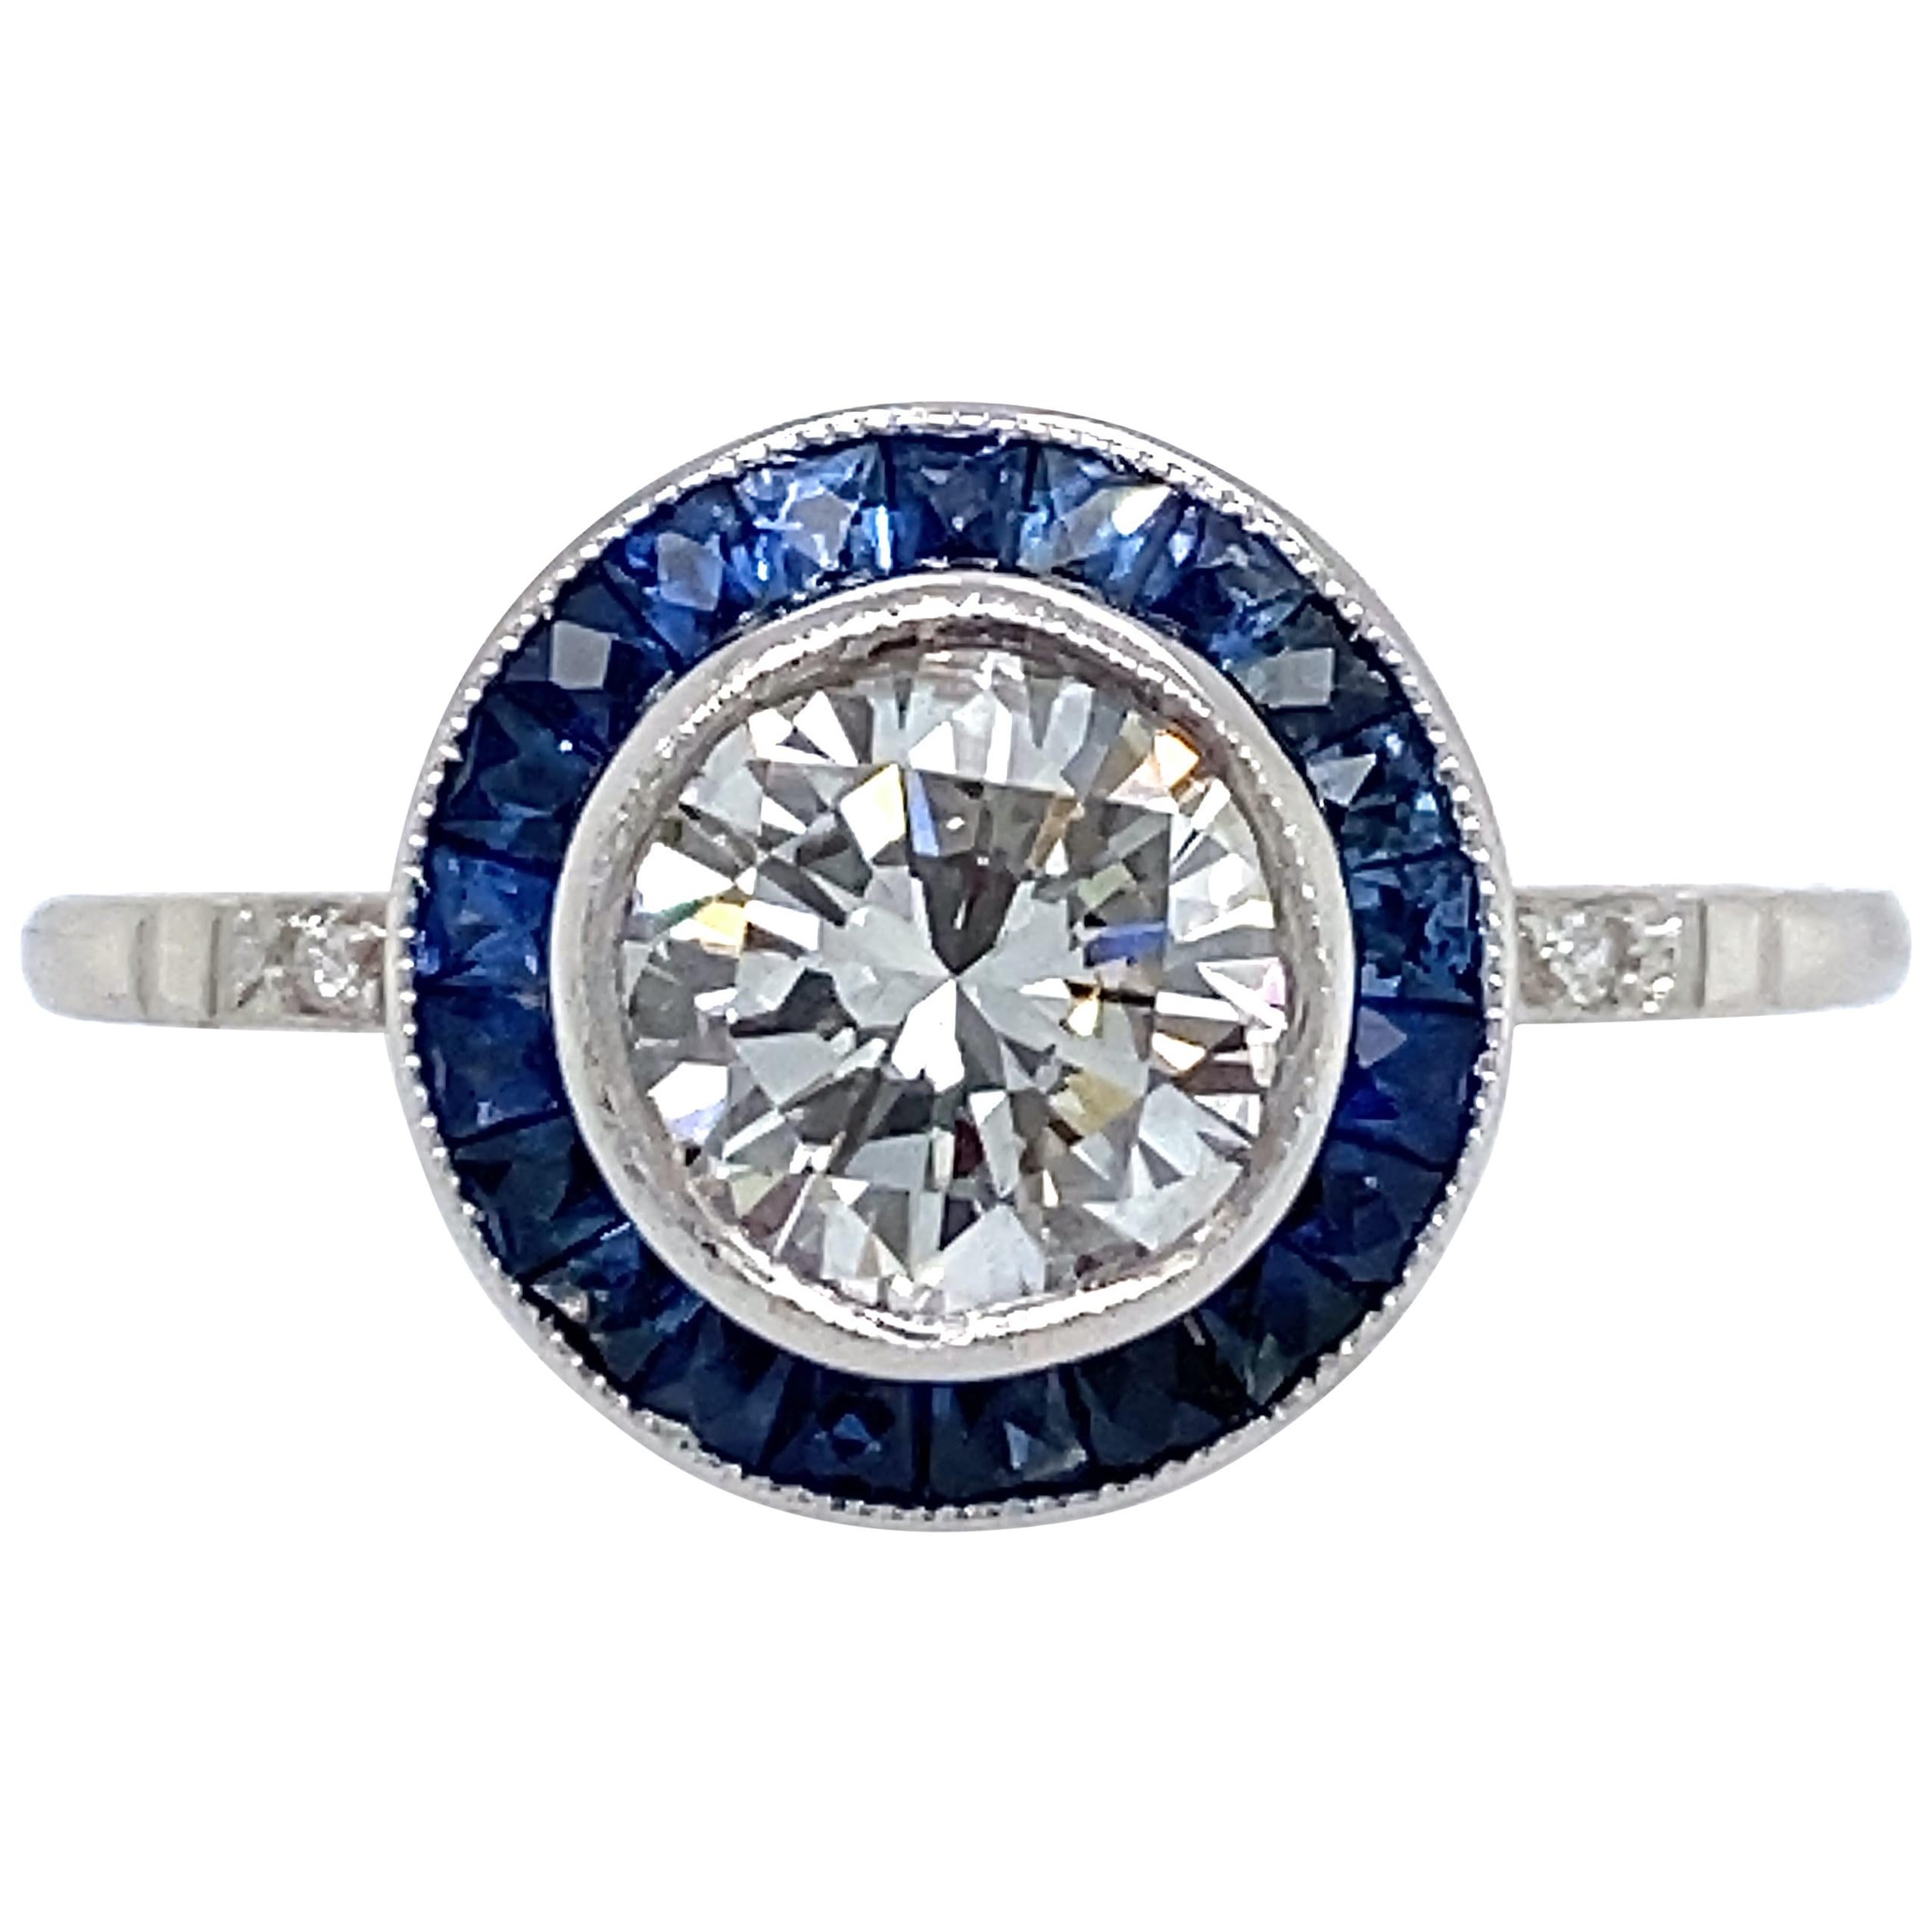 GIA Certified 1.19 Carat Diamond with Sapphire Halo in Deco-Style Platinum Ring